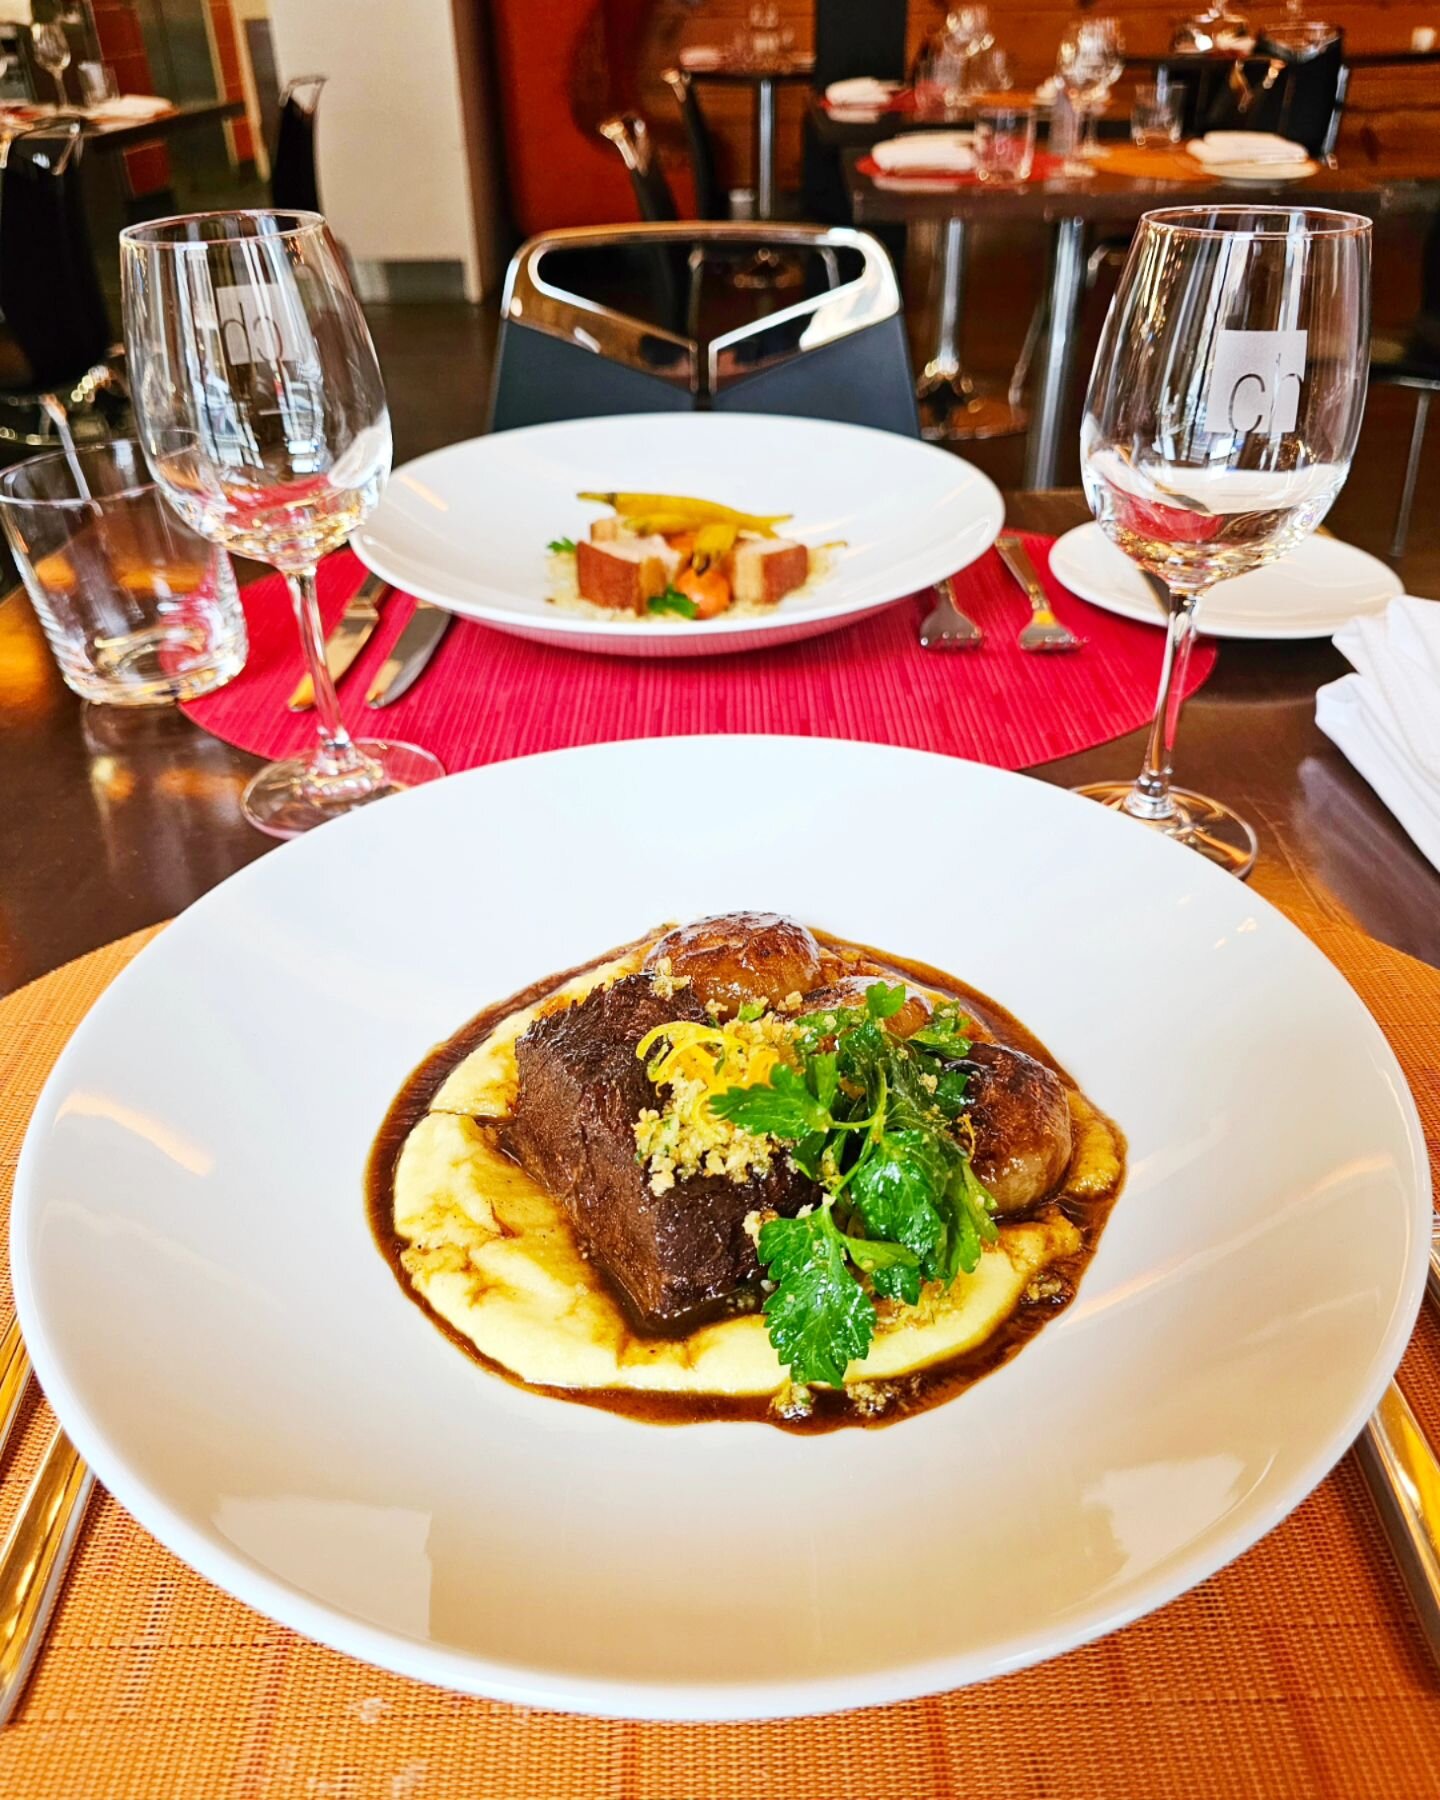 Braised Beef Cross Rib
~Fontina Polenta, Roasted Cipollini Onions, Gremolata

To learn more and see our full menu, check out our website:
www.thechefshouse.com/restaurant
.
.
.
.
.
.
.
.
.
.
#thechefshouse #georgebrowncollege #gbcchca #chefschool #cu